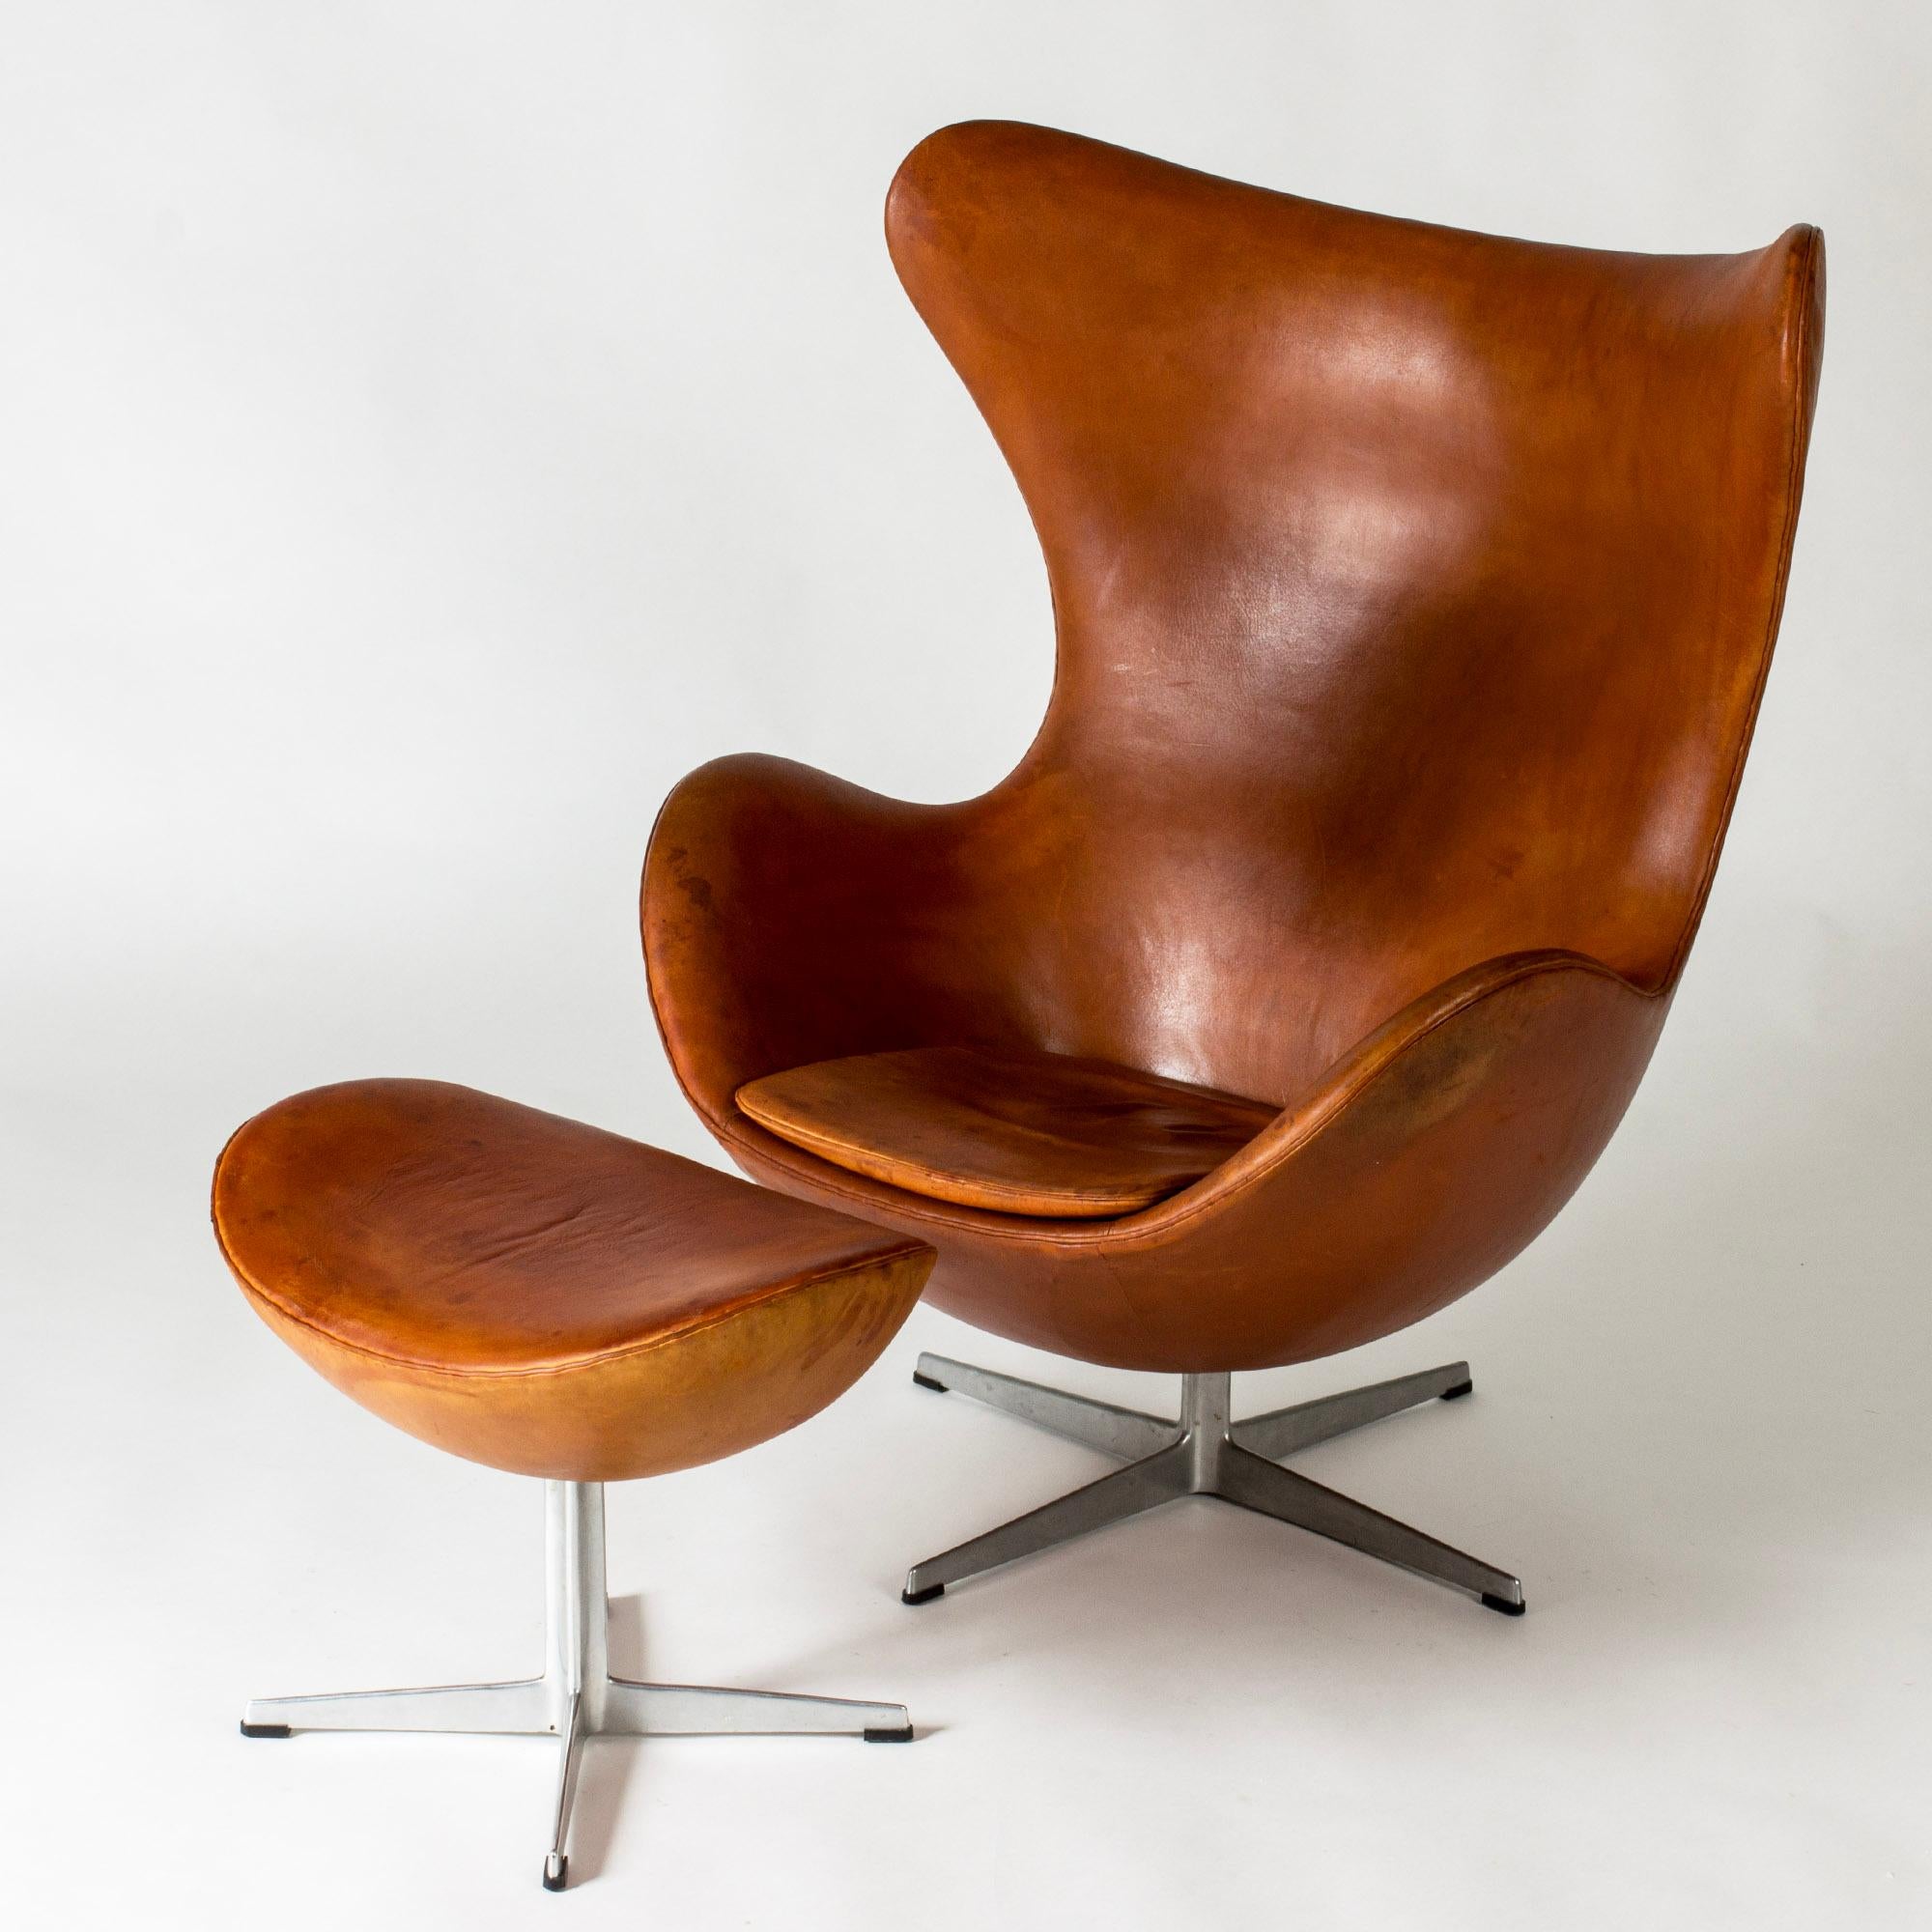 Iconic “Egg” lounge chair and footstool by Arne Jacobsen, upholstered with cognac brown leather. This design was originally made for the SAS Radisson Hotel in Copenhagen in 1958.

Ottoman dimensions:
Stool: 43 cm, width 55 cm, depth 40 cm